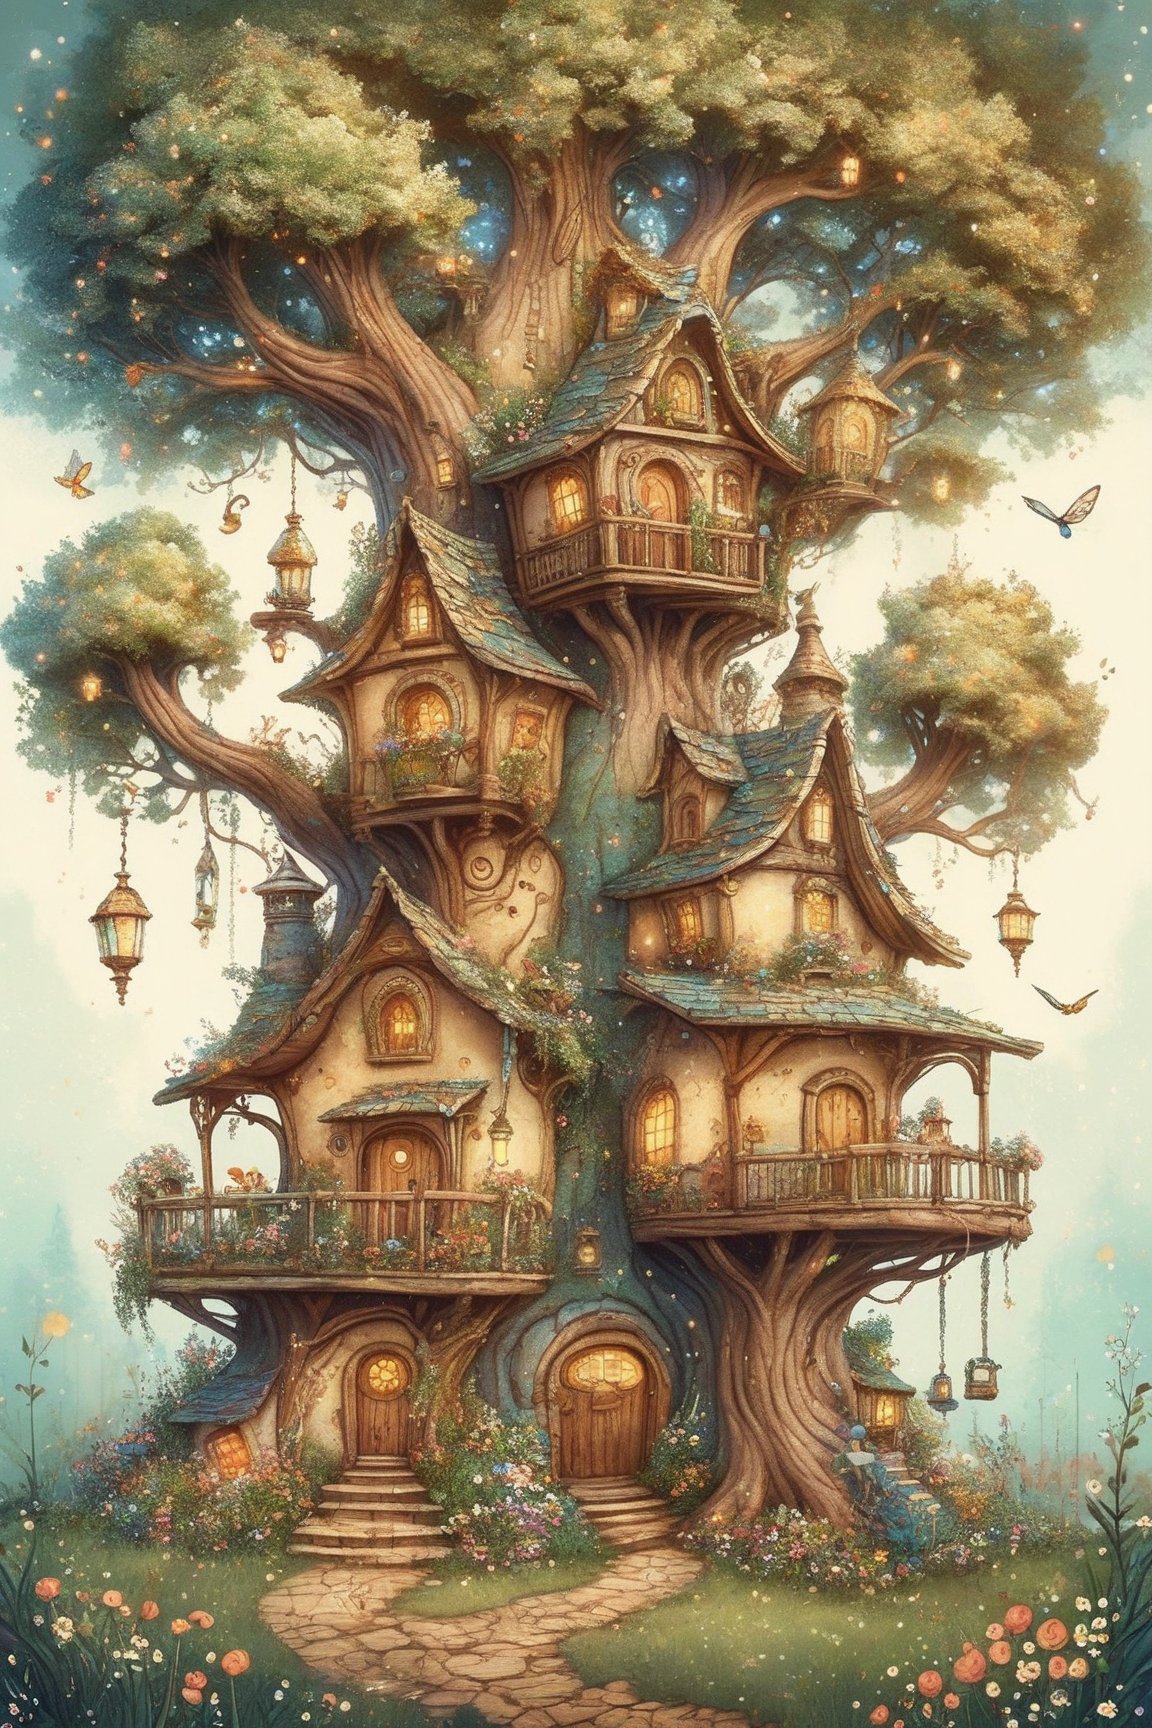 create an image of a big tall busy whimsical treehouse, there are windows and doors, a winding staircase windfs up the side of the tree, there are little flower gardens around and grass ,glitter